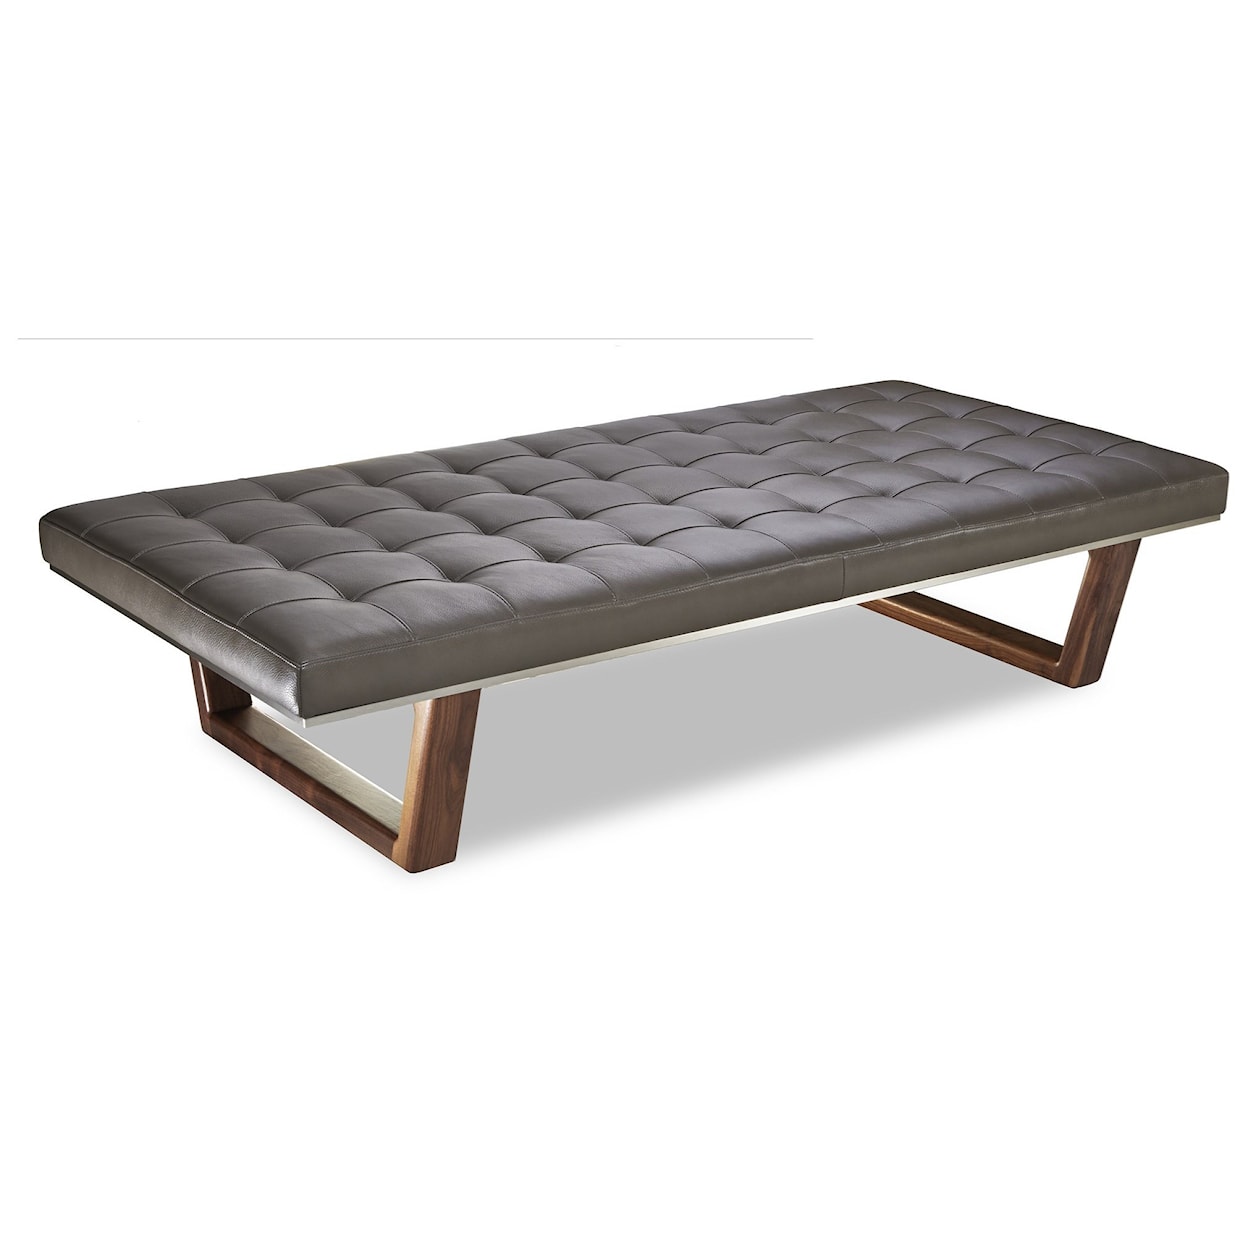 American Leather Edison Upholstered Bench